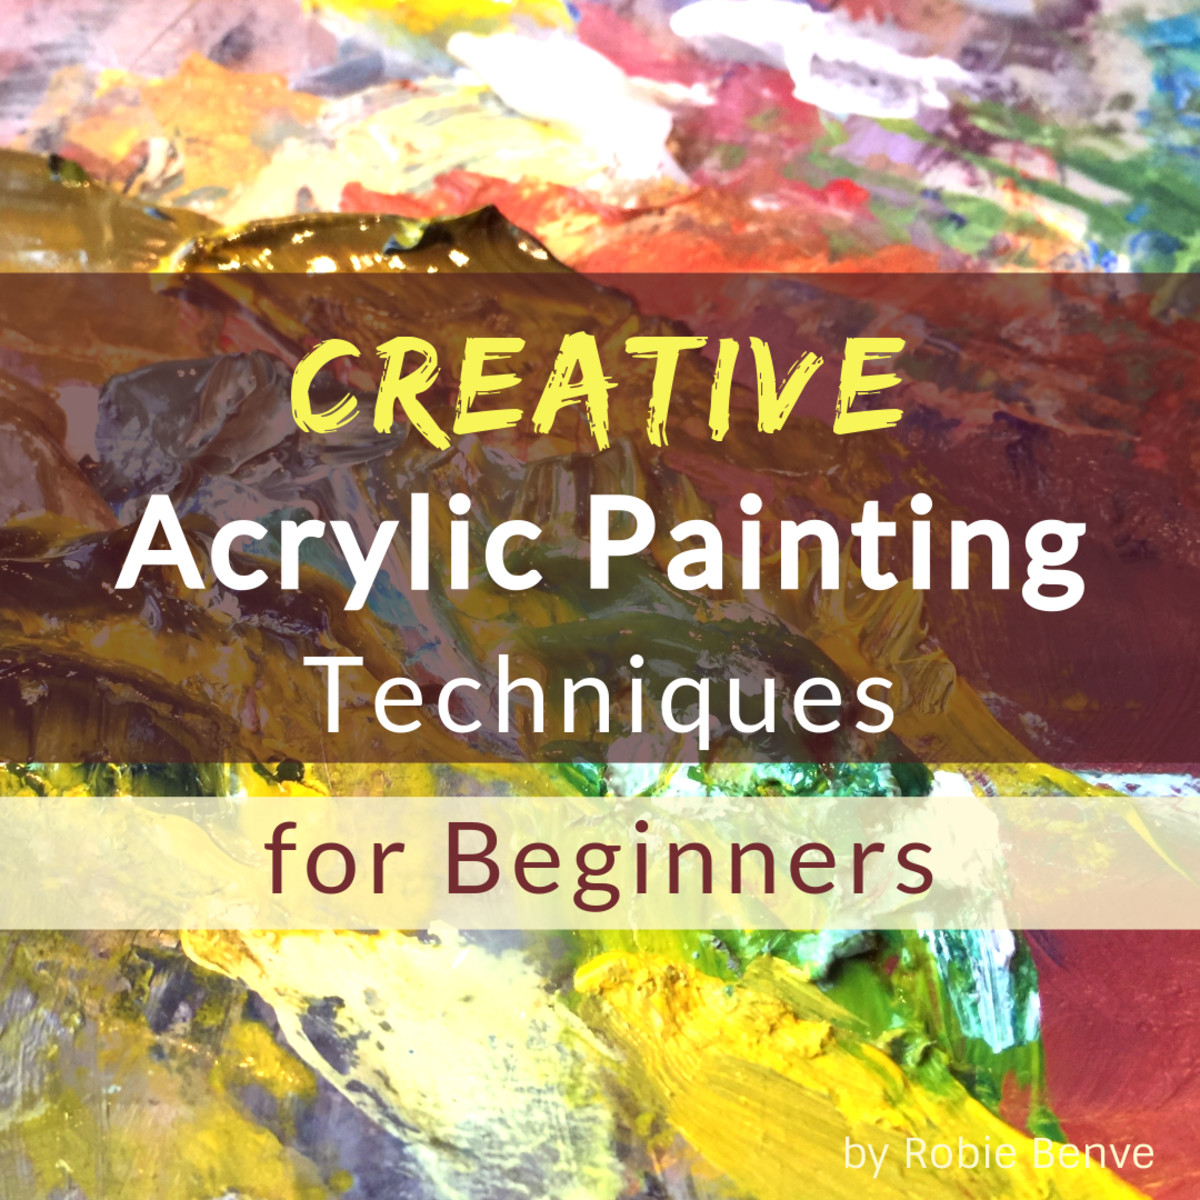 Painting tips for beginners. A guide to acrylic paint techniques  you can use to get creative effects: splattering, pouring, masking, collage, and more.